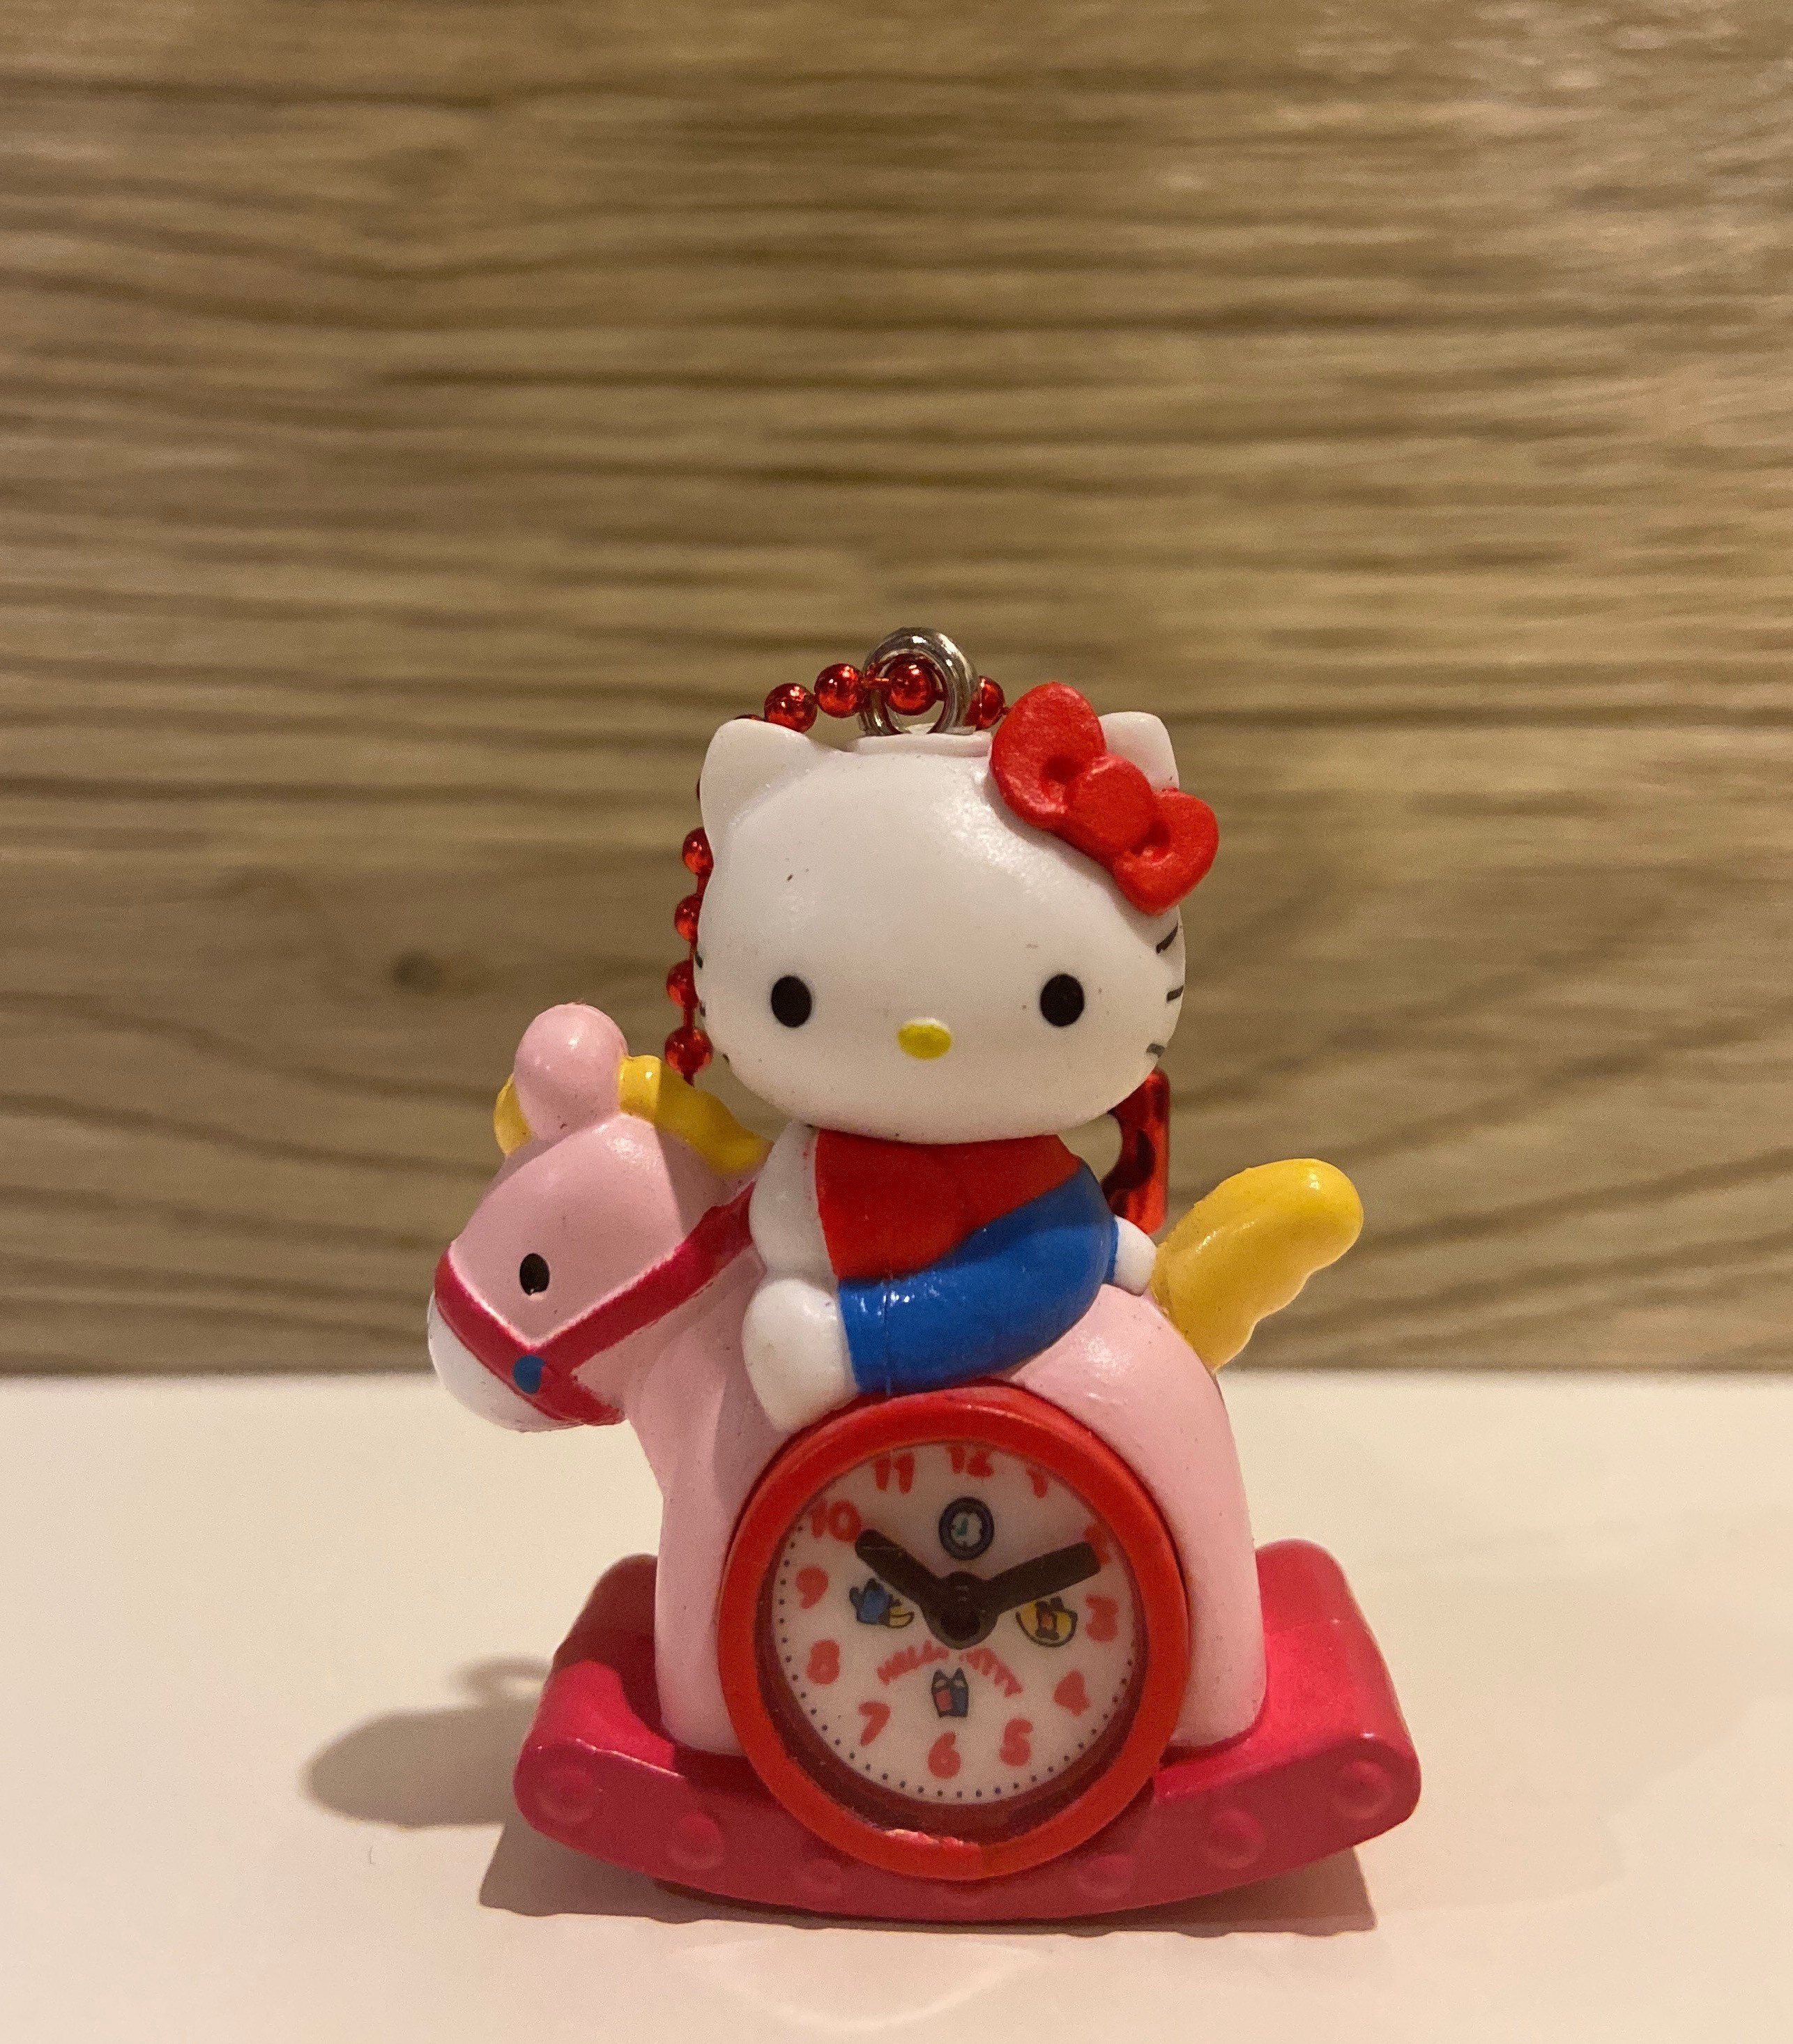 Hello Kitty - It's sew cool to sew in the summer with a #HelloKitty sewing  machine! Available now at Sanrio.com:  Fun in the sun!